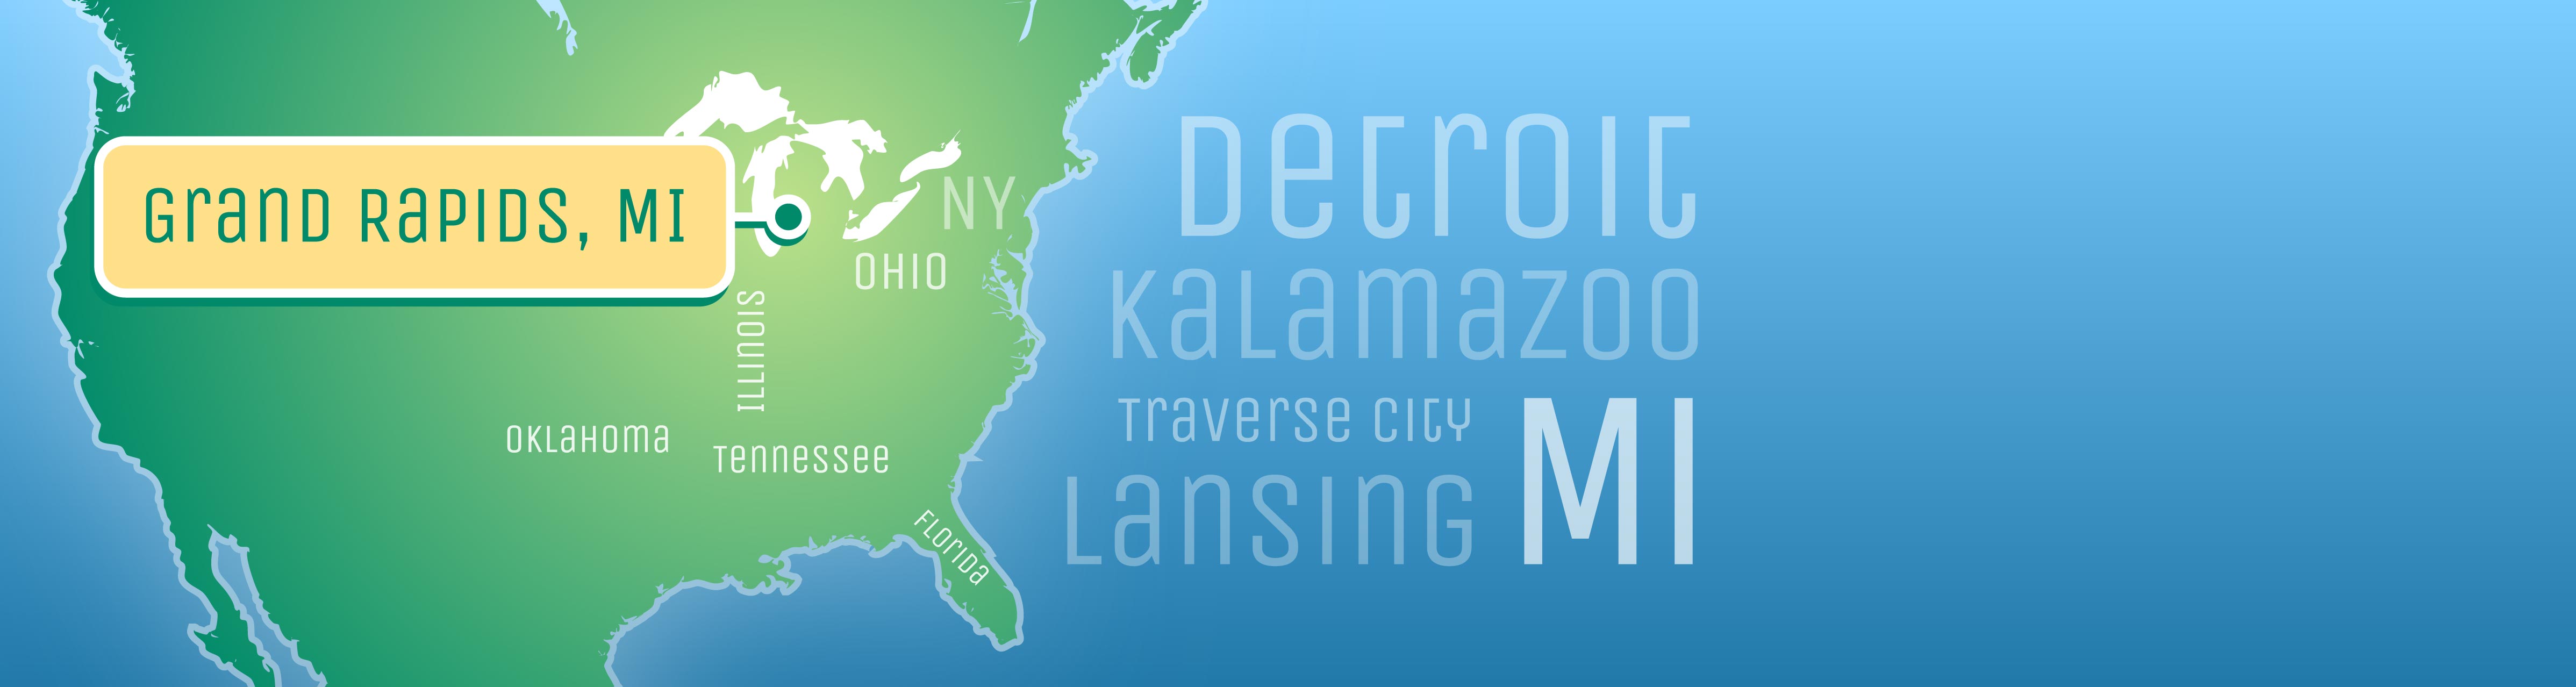 Map showing we are located in Grand Rapids, MI, but serving Detroit, Kalamazoo, Lansing, and Traverse City. We have placed candidates in New York, Ohio, Illinois, Okalahome, Tennessee and Florida.